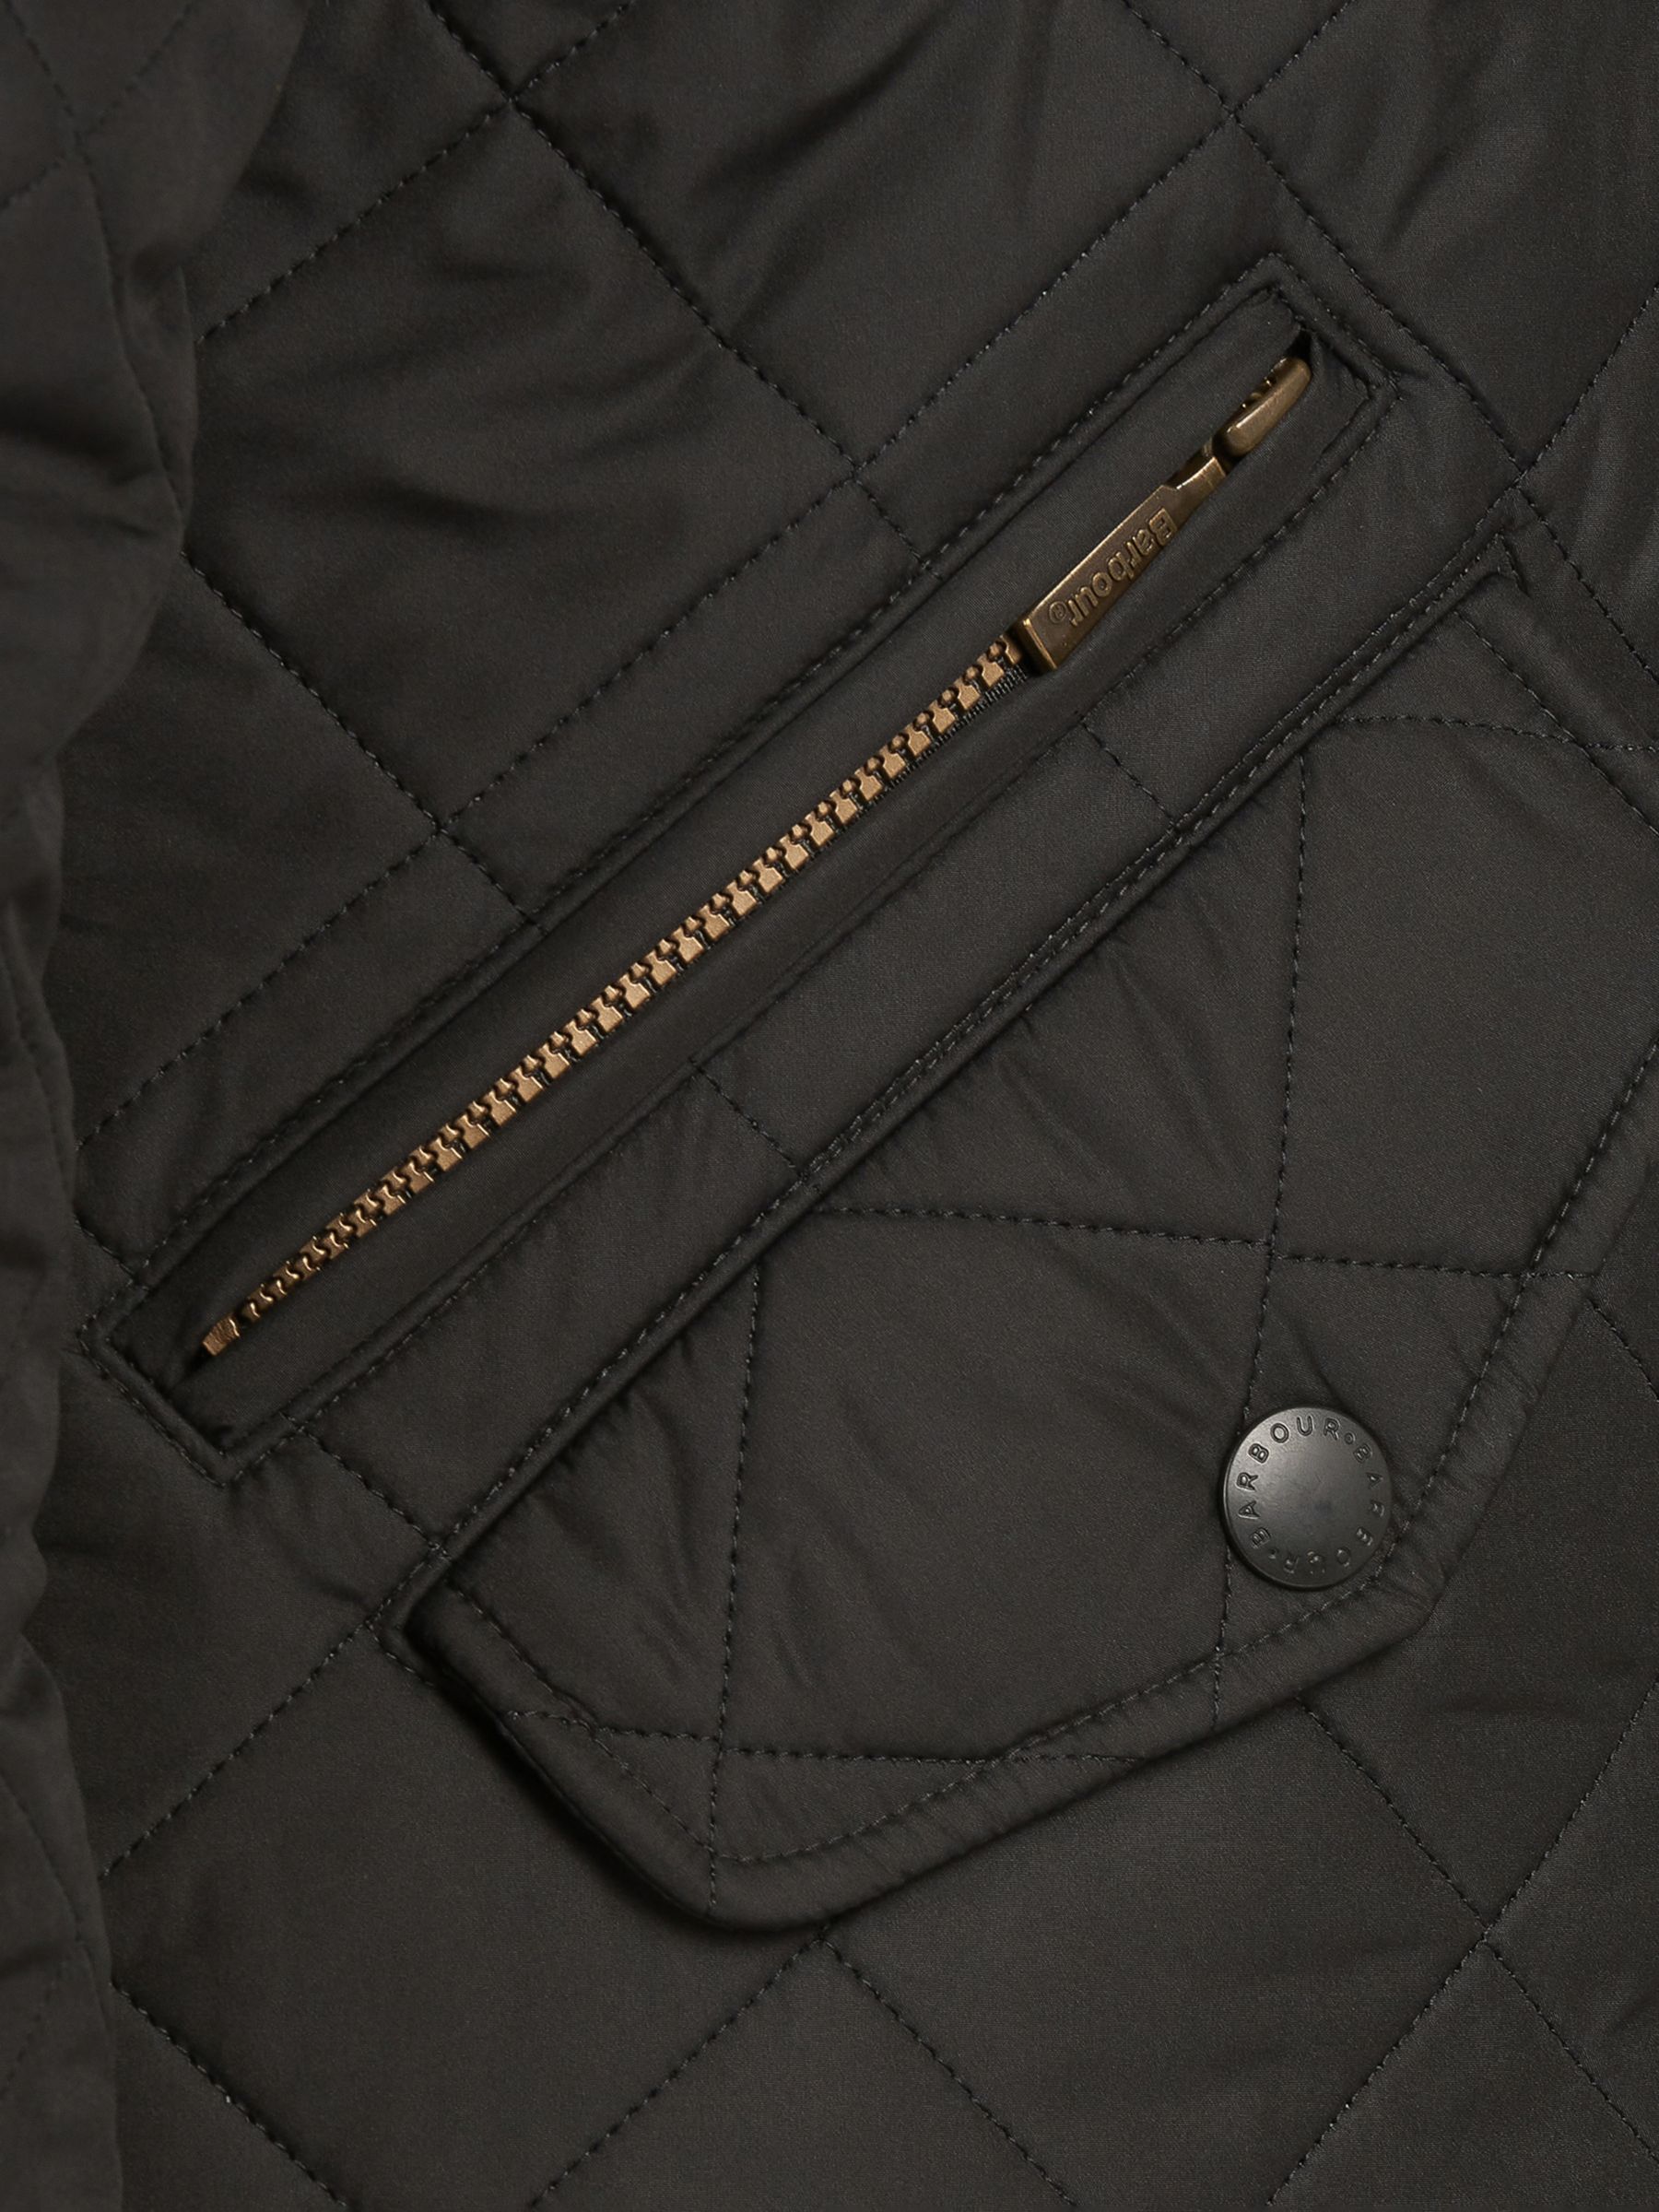 Buy Barbour Lifestyle Powell Quilted Jacket | John Lewis